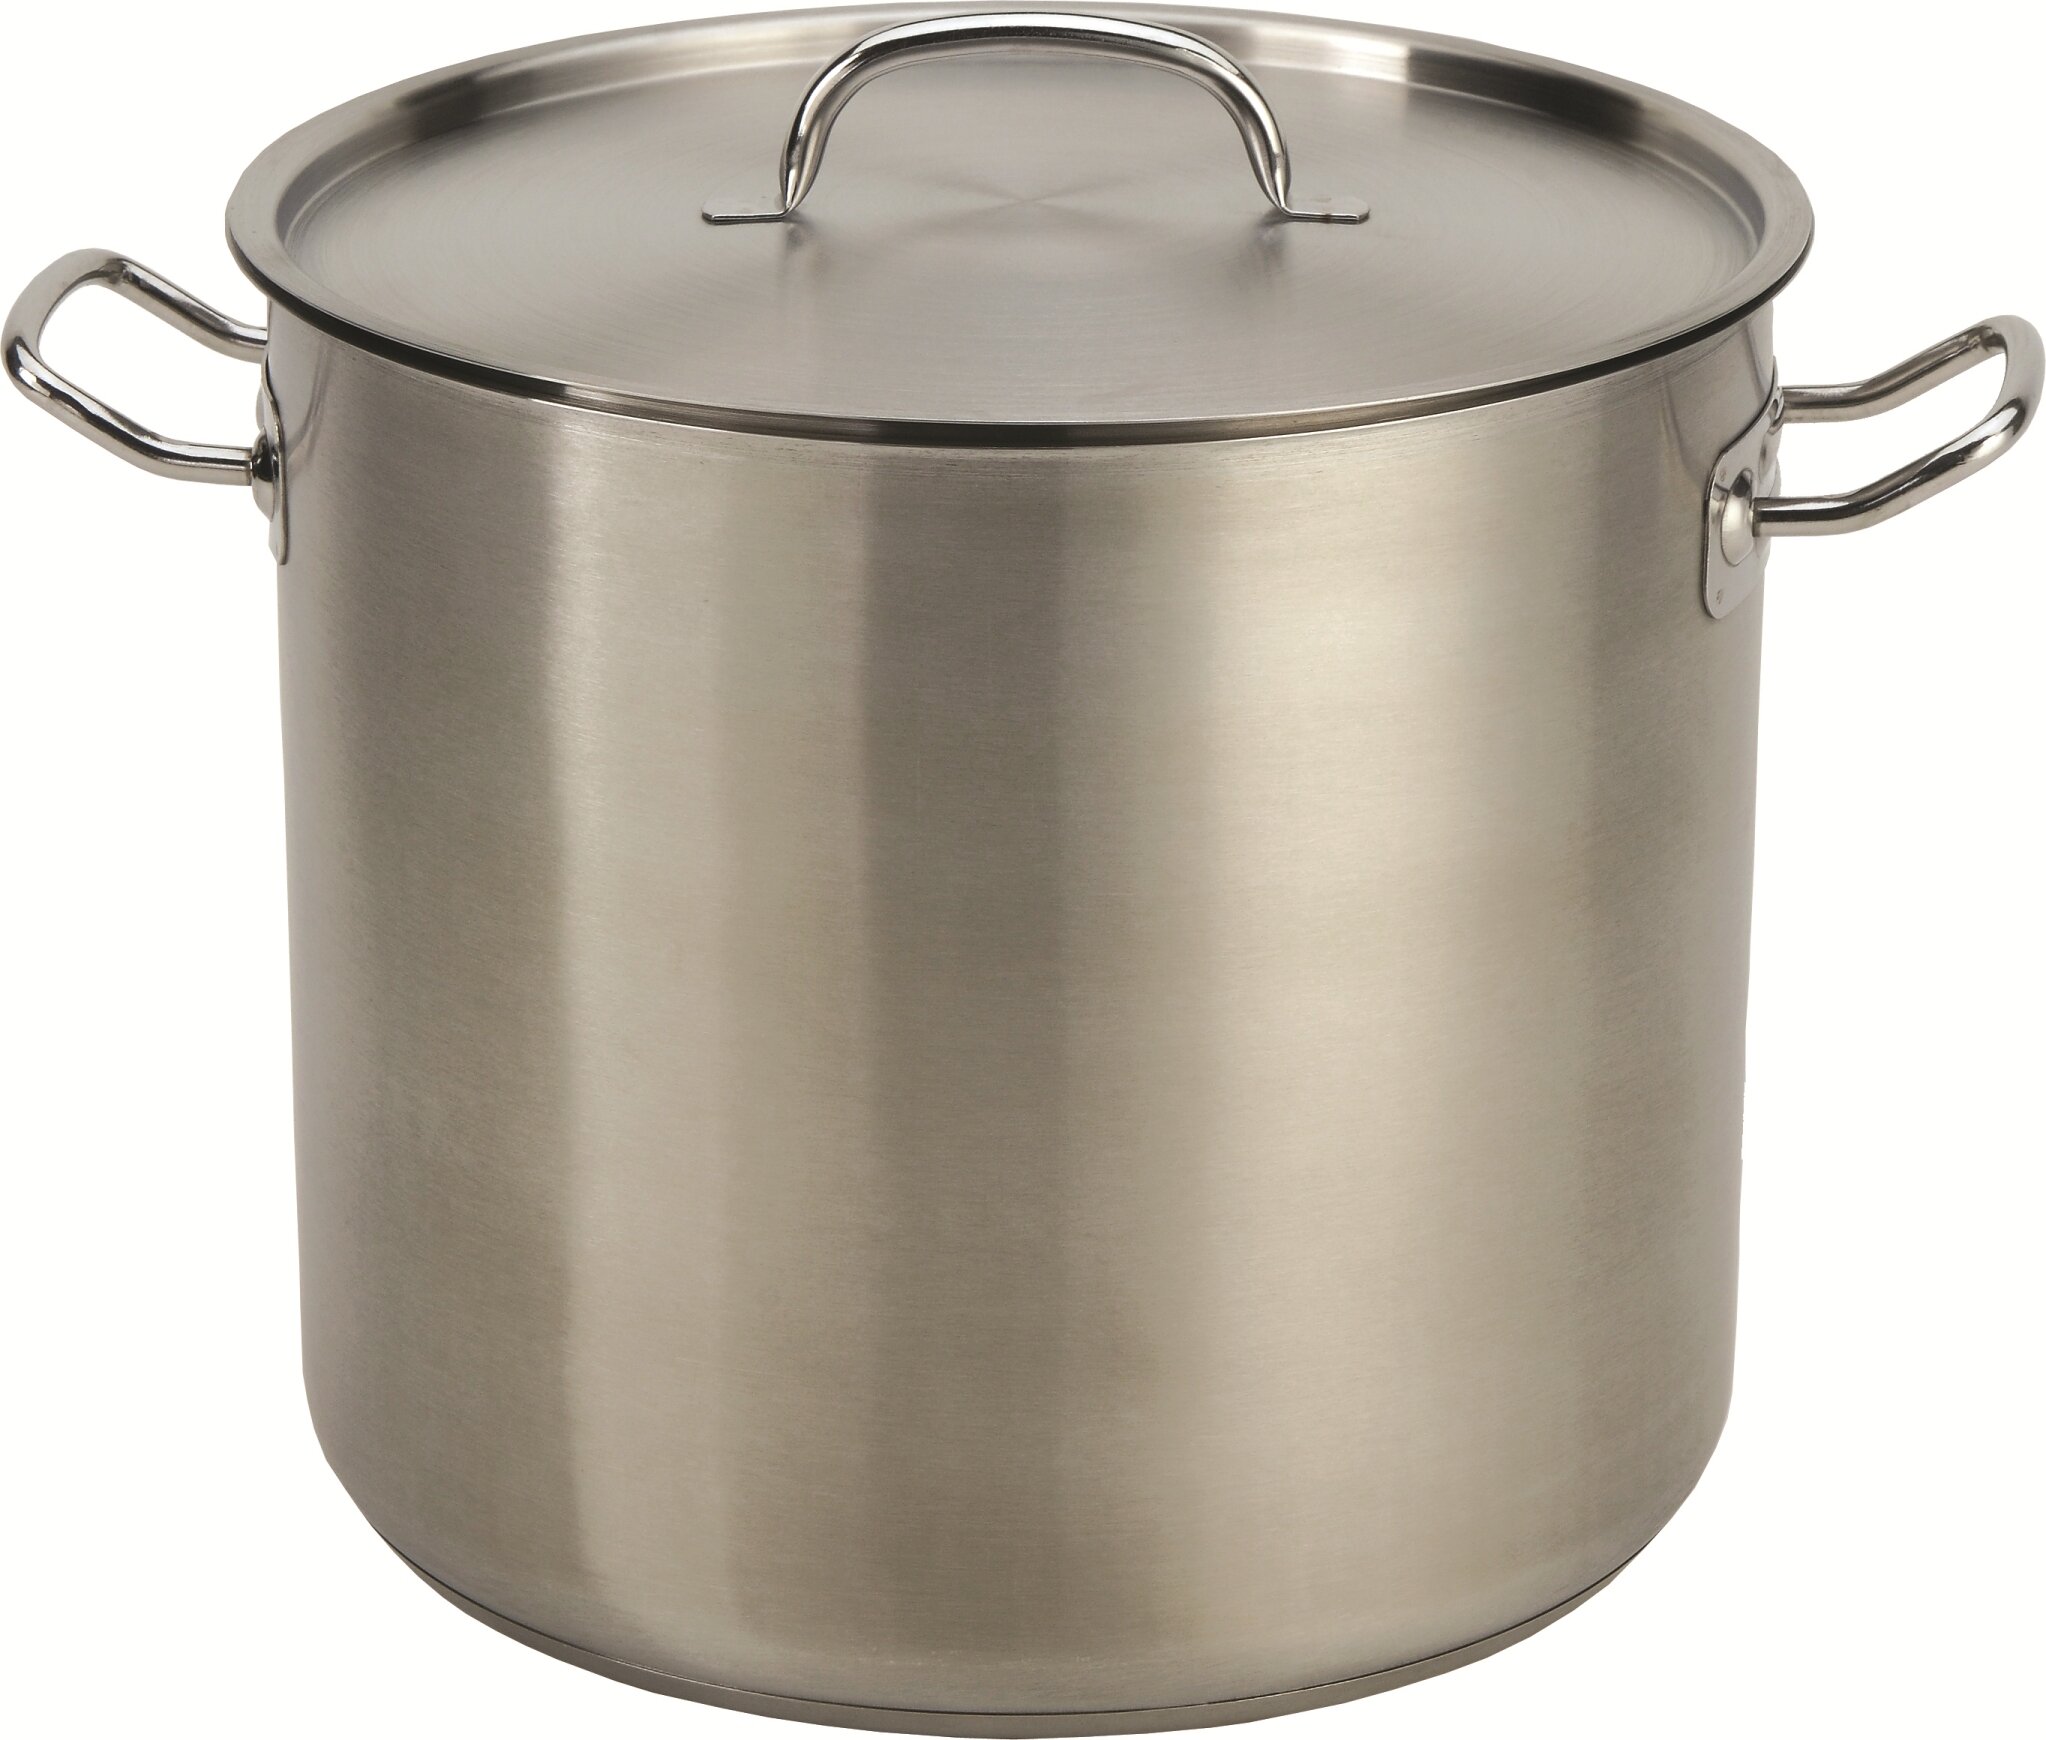 Cooks Standard Professional 24 qt. Stainless Steel Stockpot with Lid